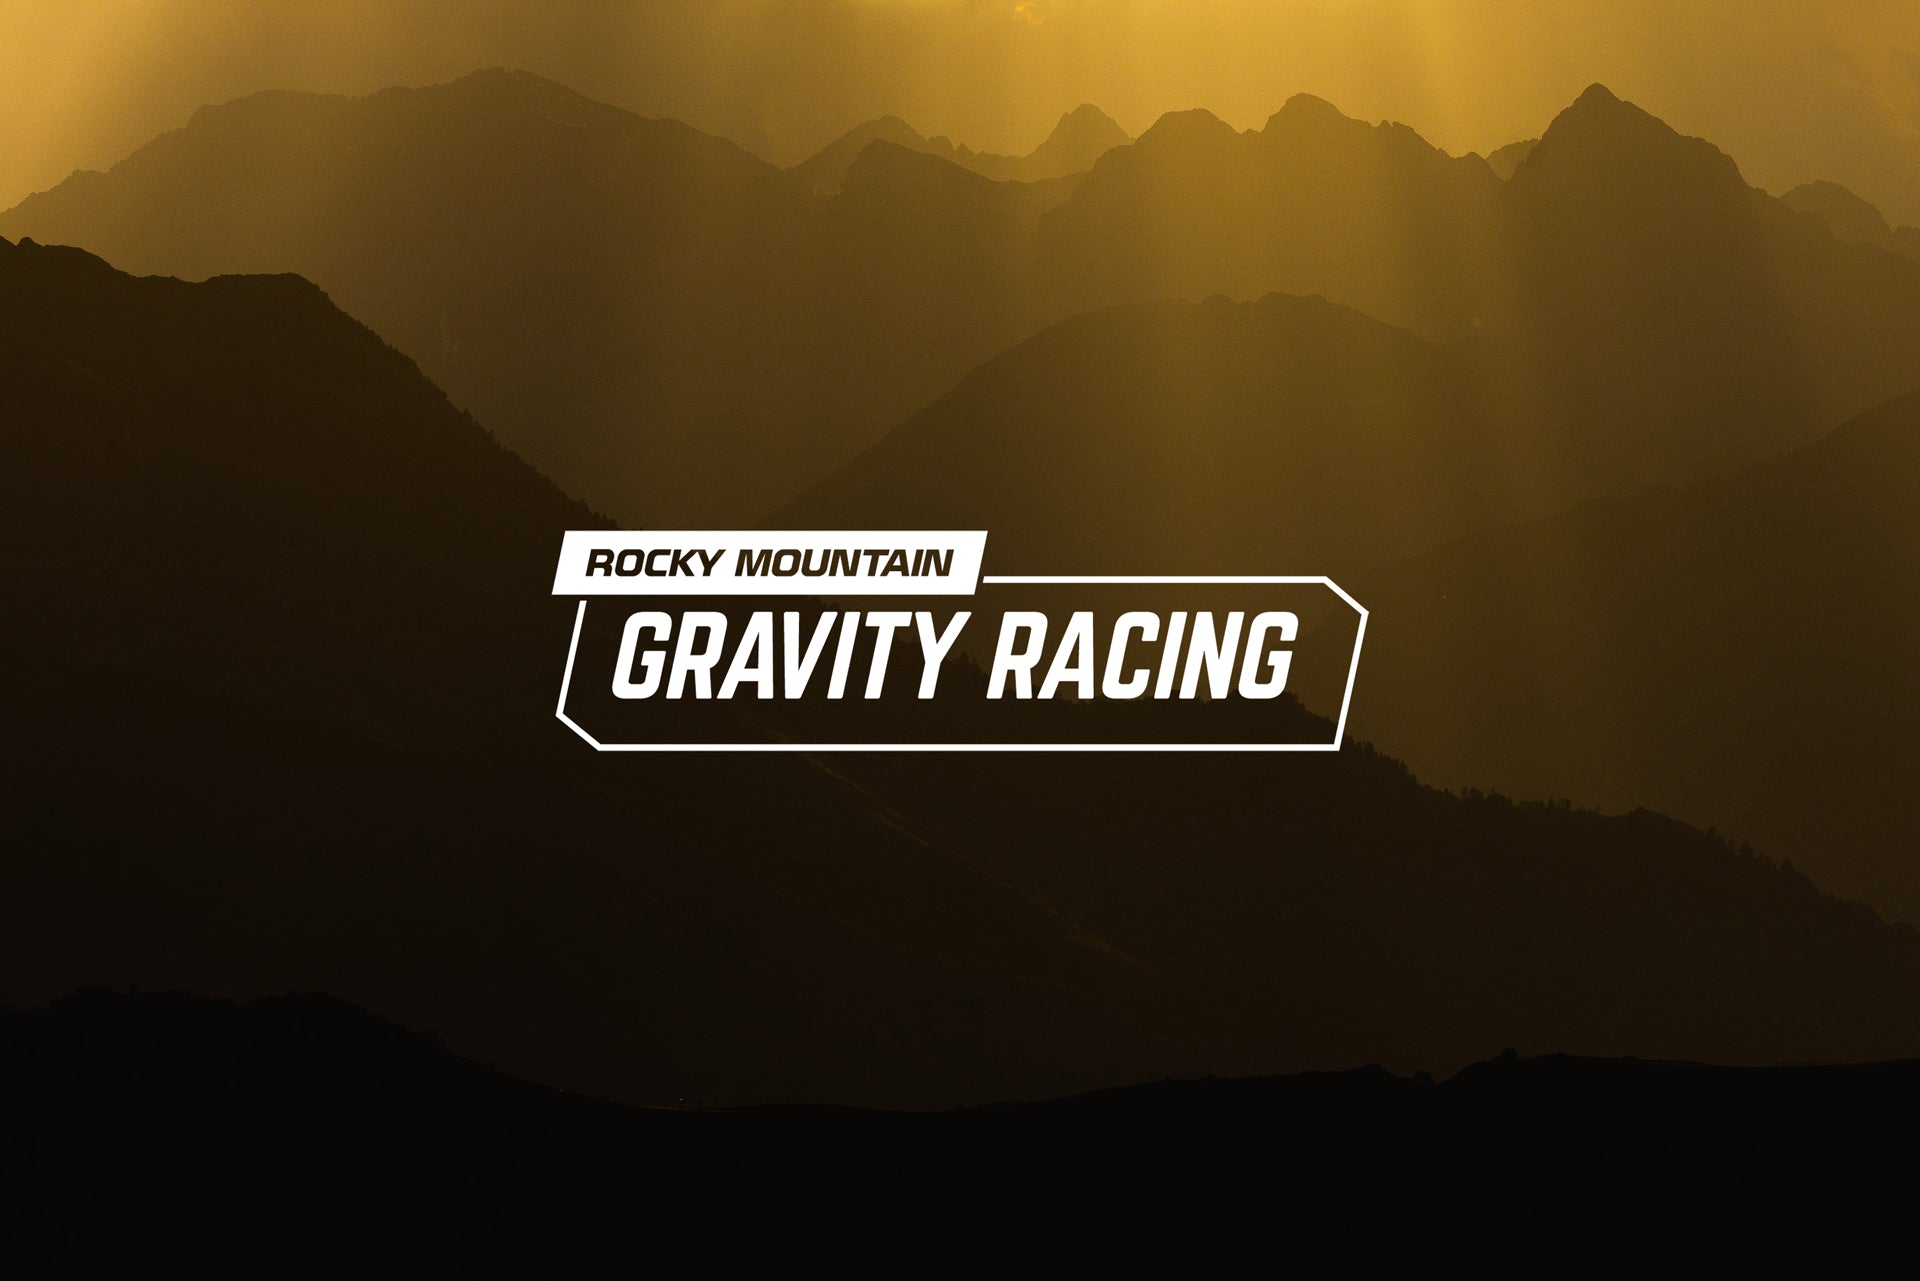 Introducing the Rocky Mountain Gravity Racing team